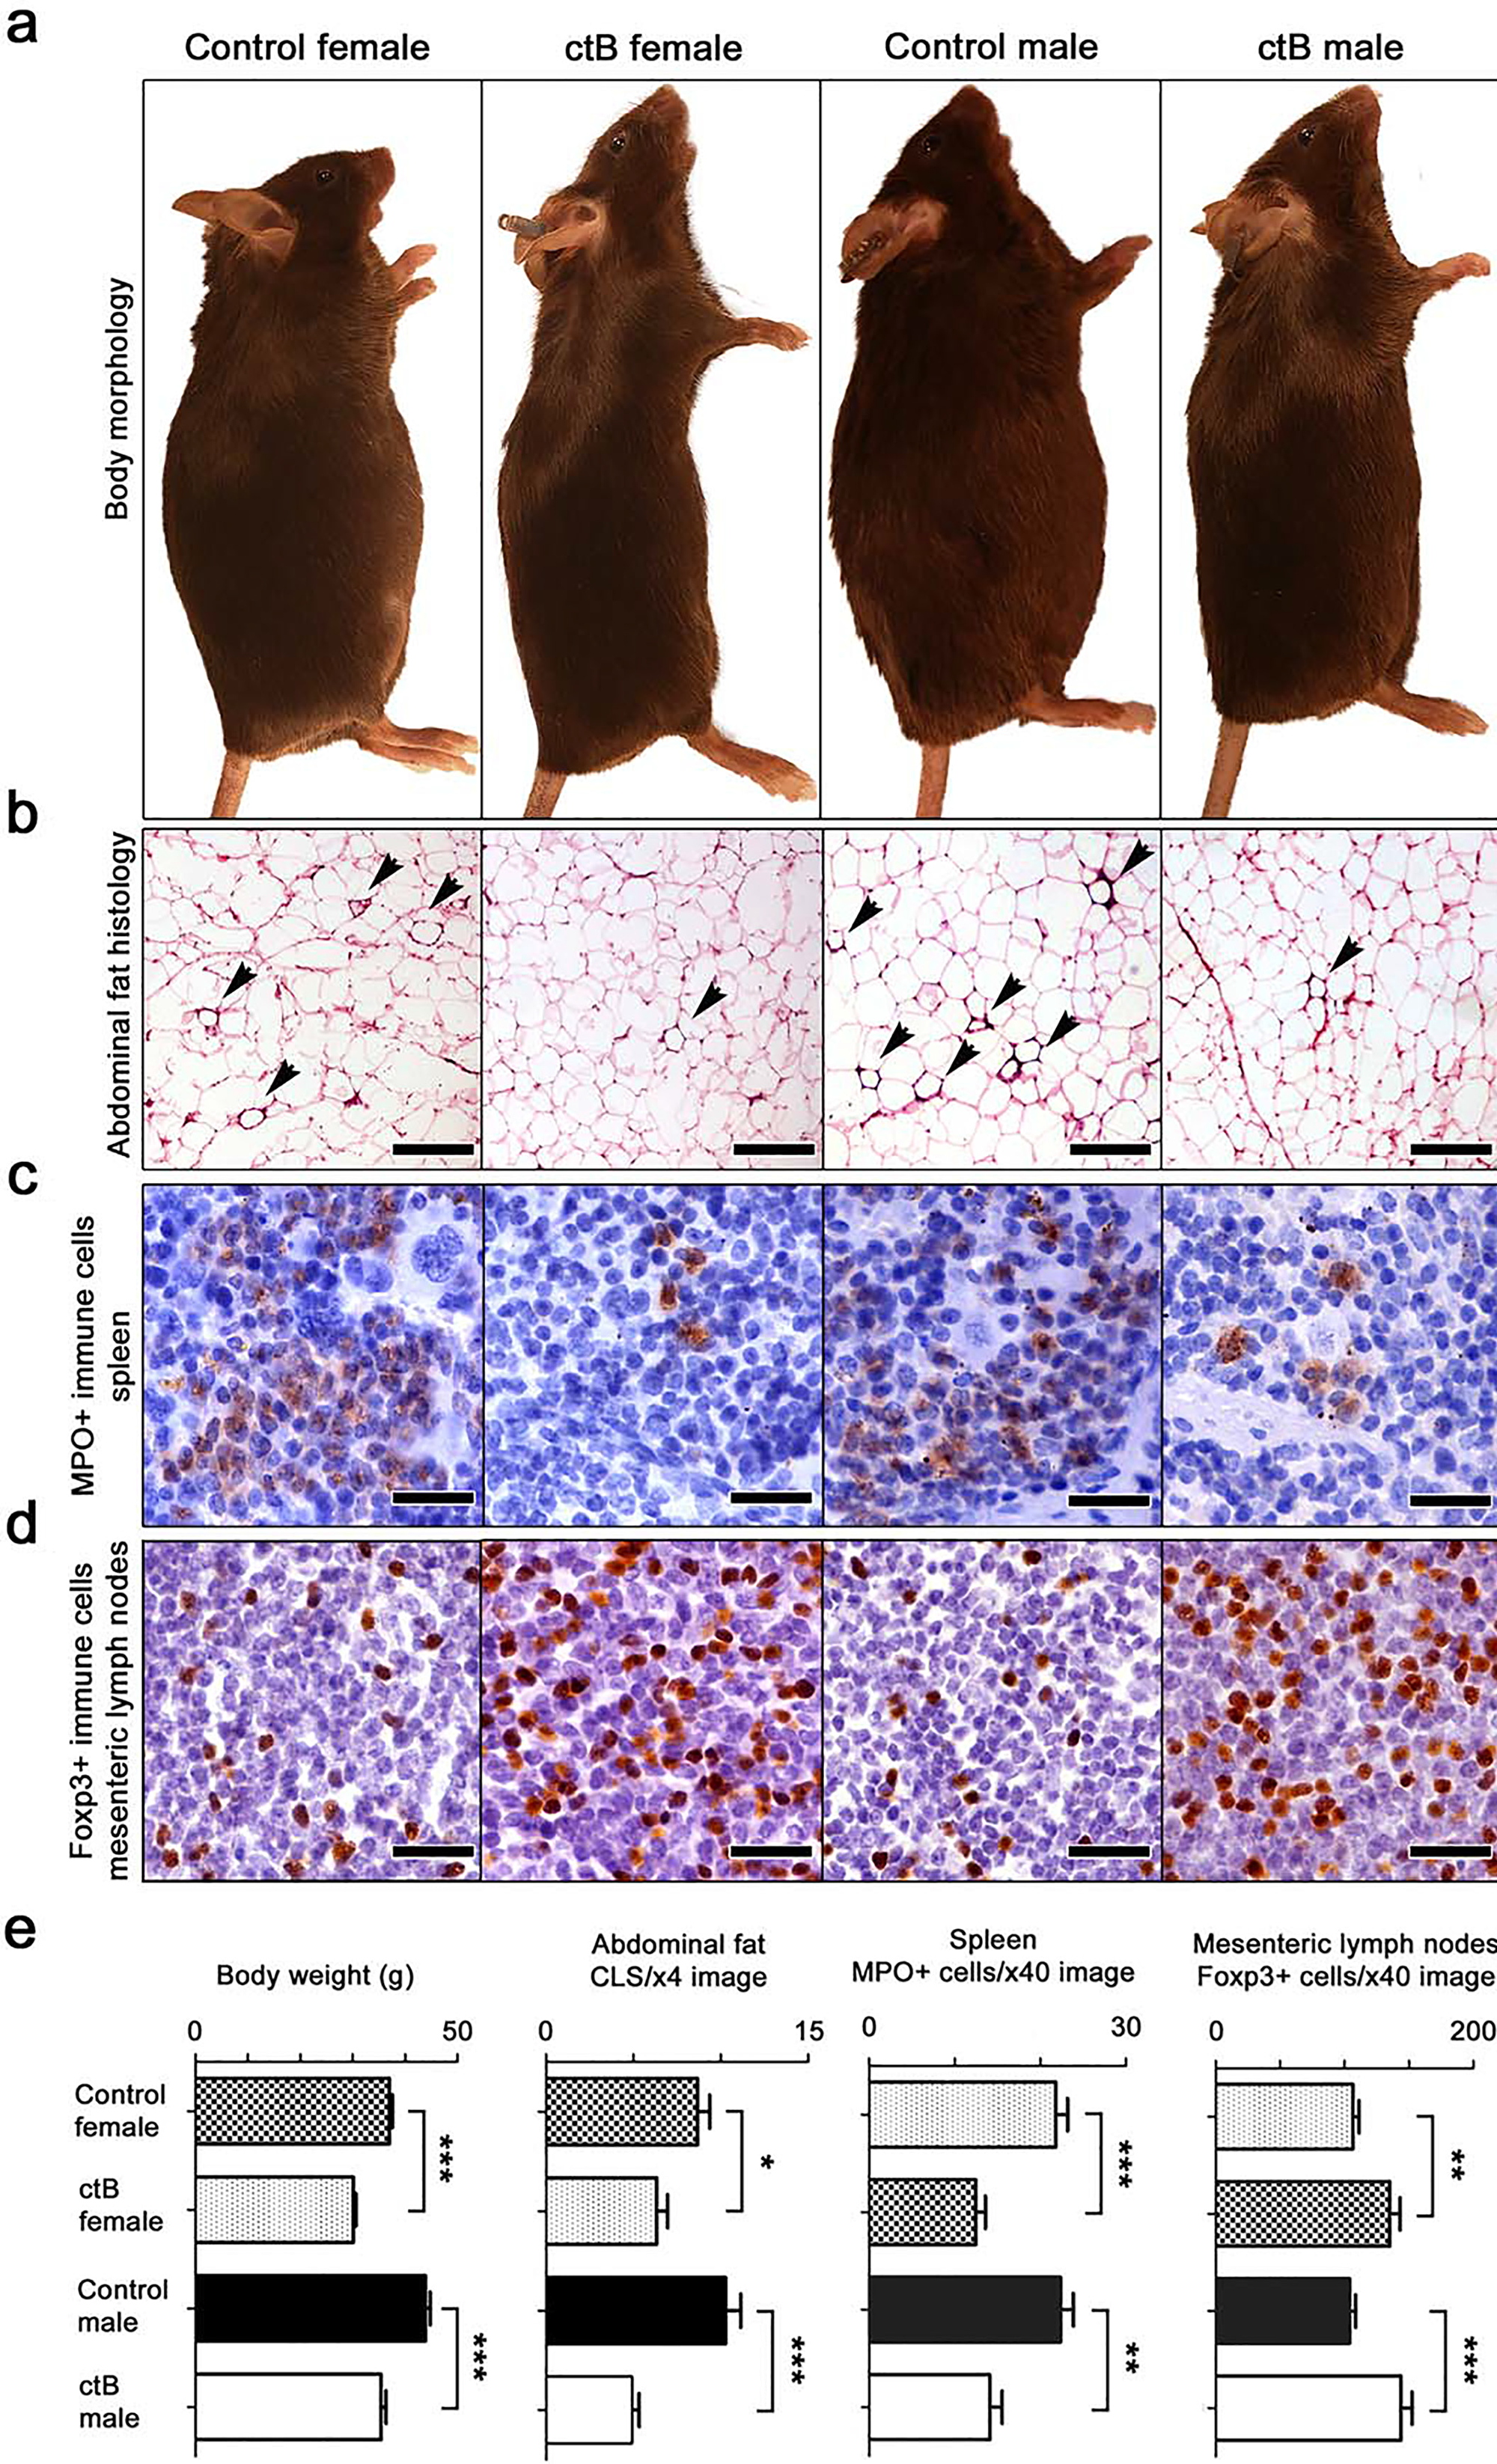 Early-life intervention with ctB rescues mice from age-associated obesity and inflammation.